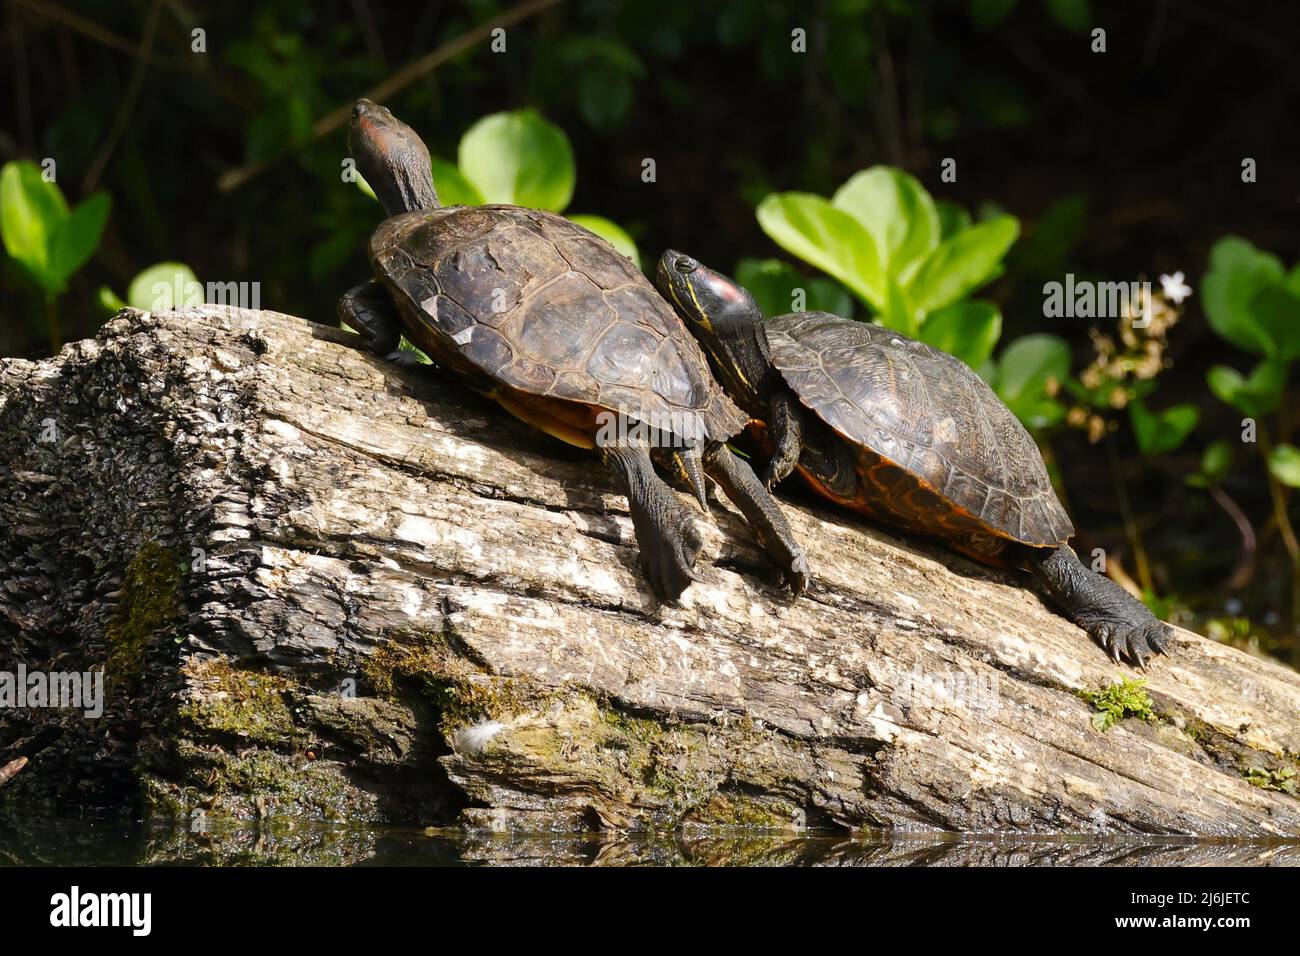 Two Red-eared Slider Terrapins basking on a log in a London Pond. Stock Photo